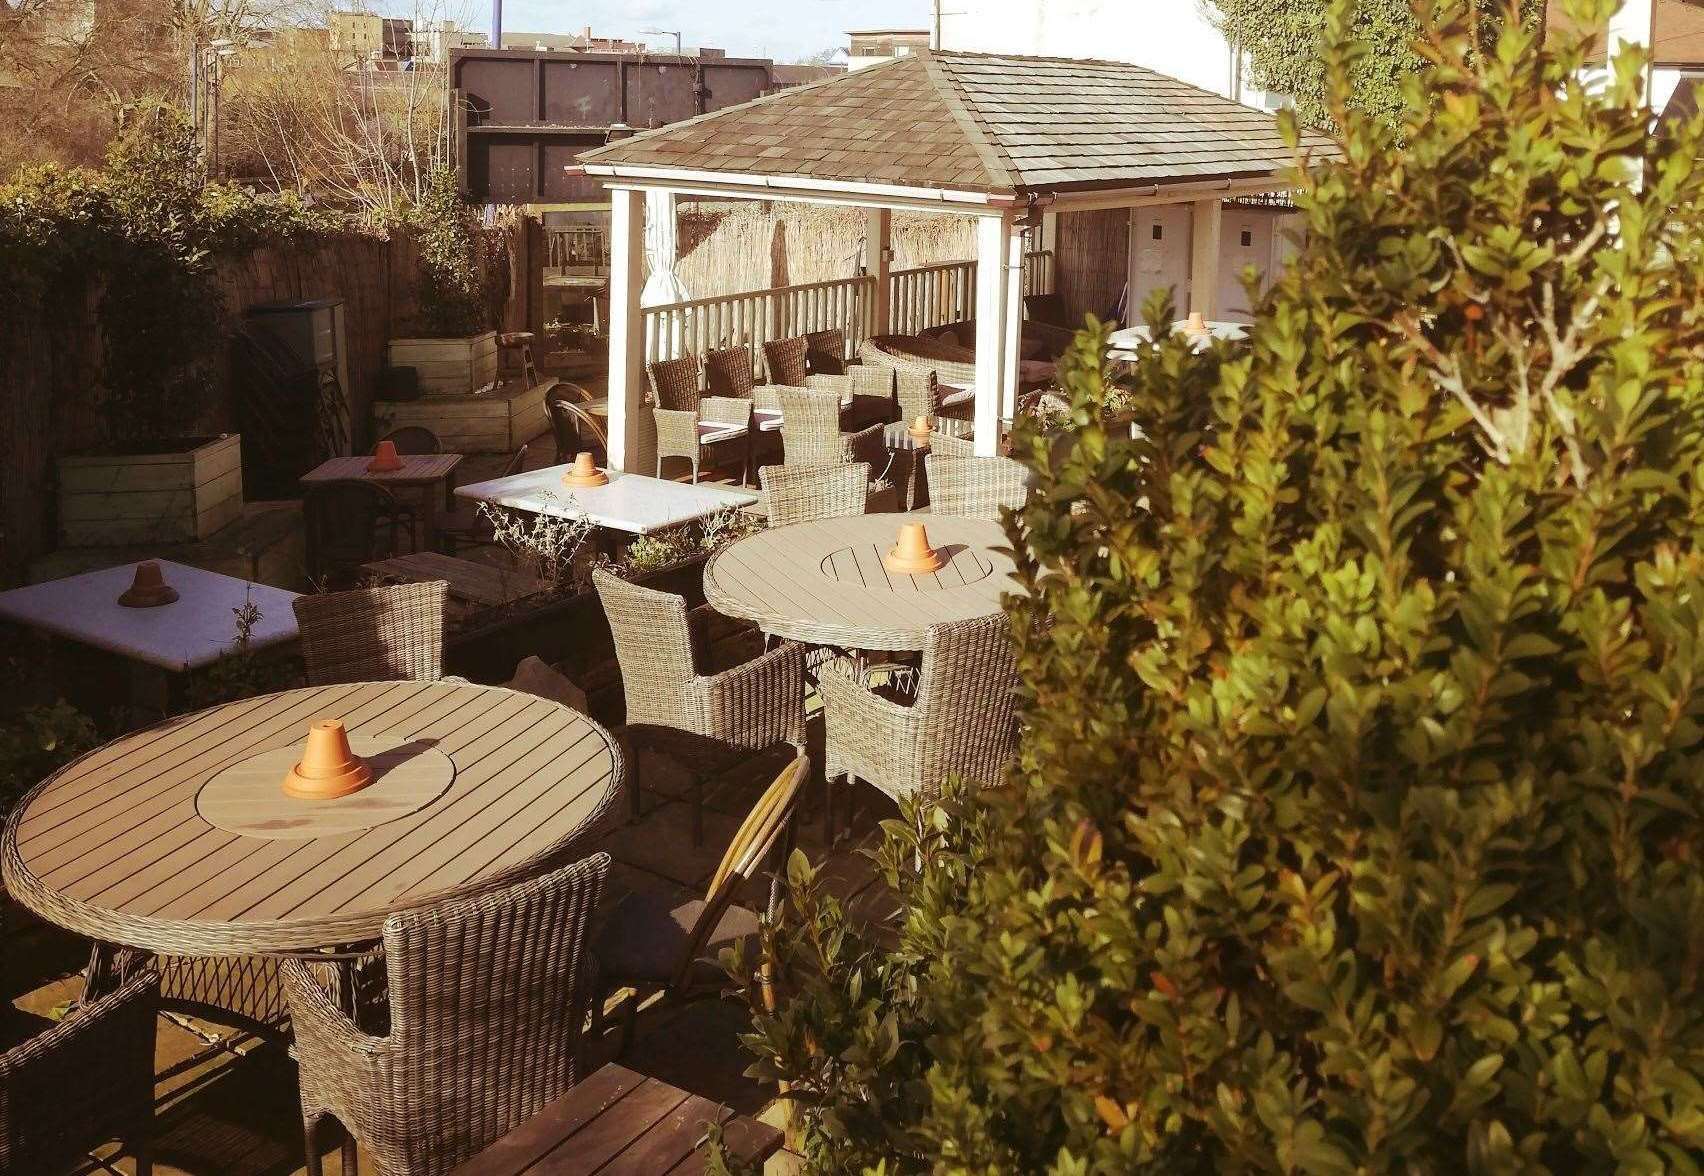 The Malt Shovel has lots of contemporary seating areas in its beer garden